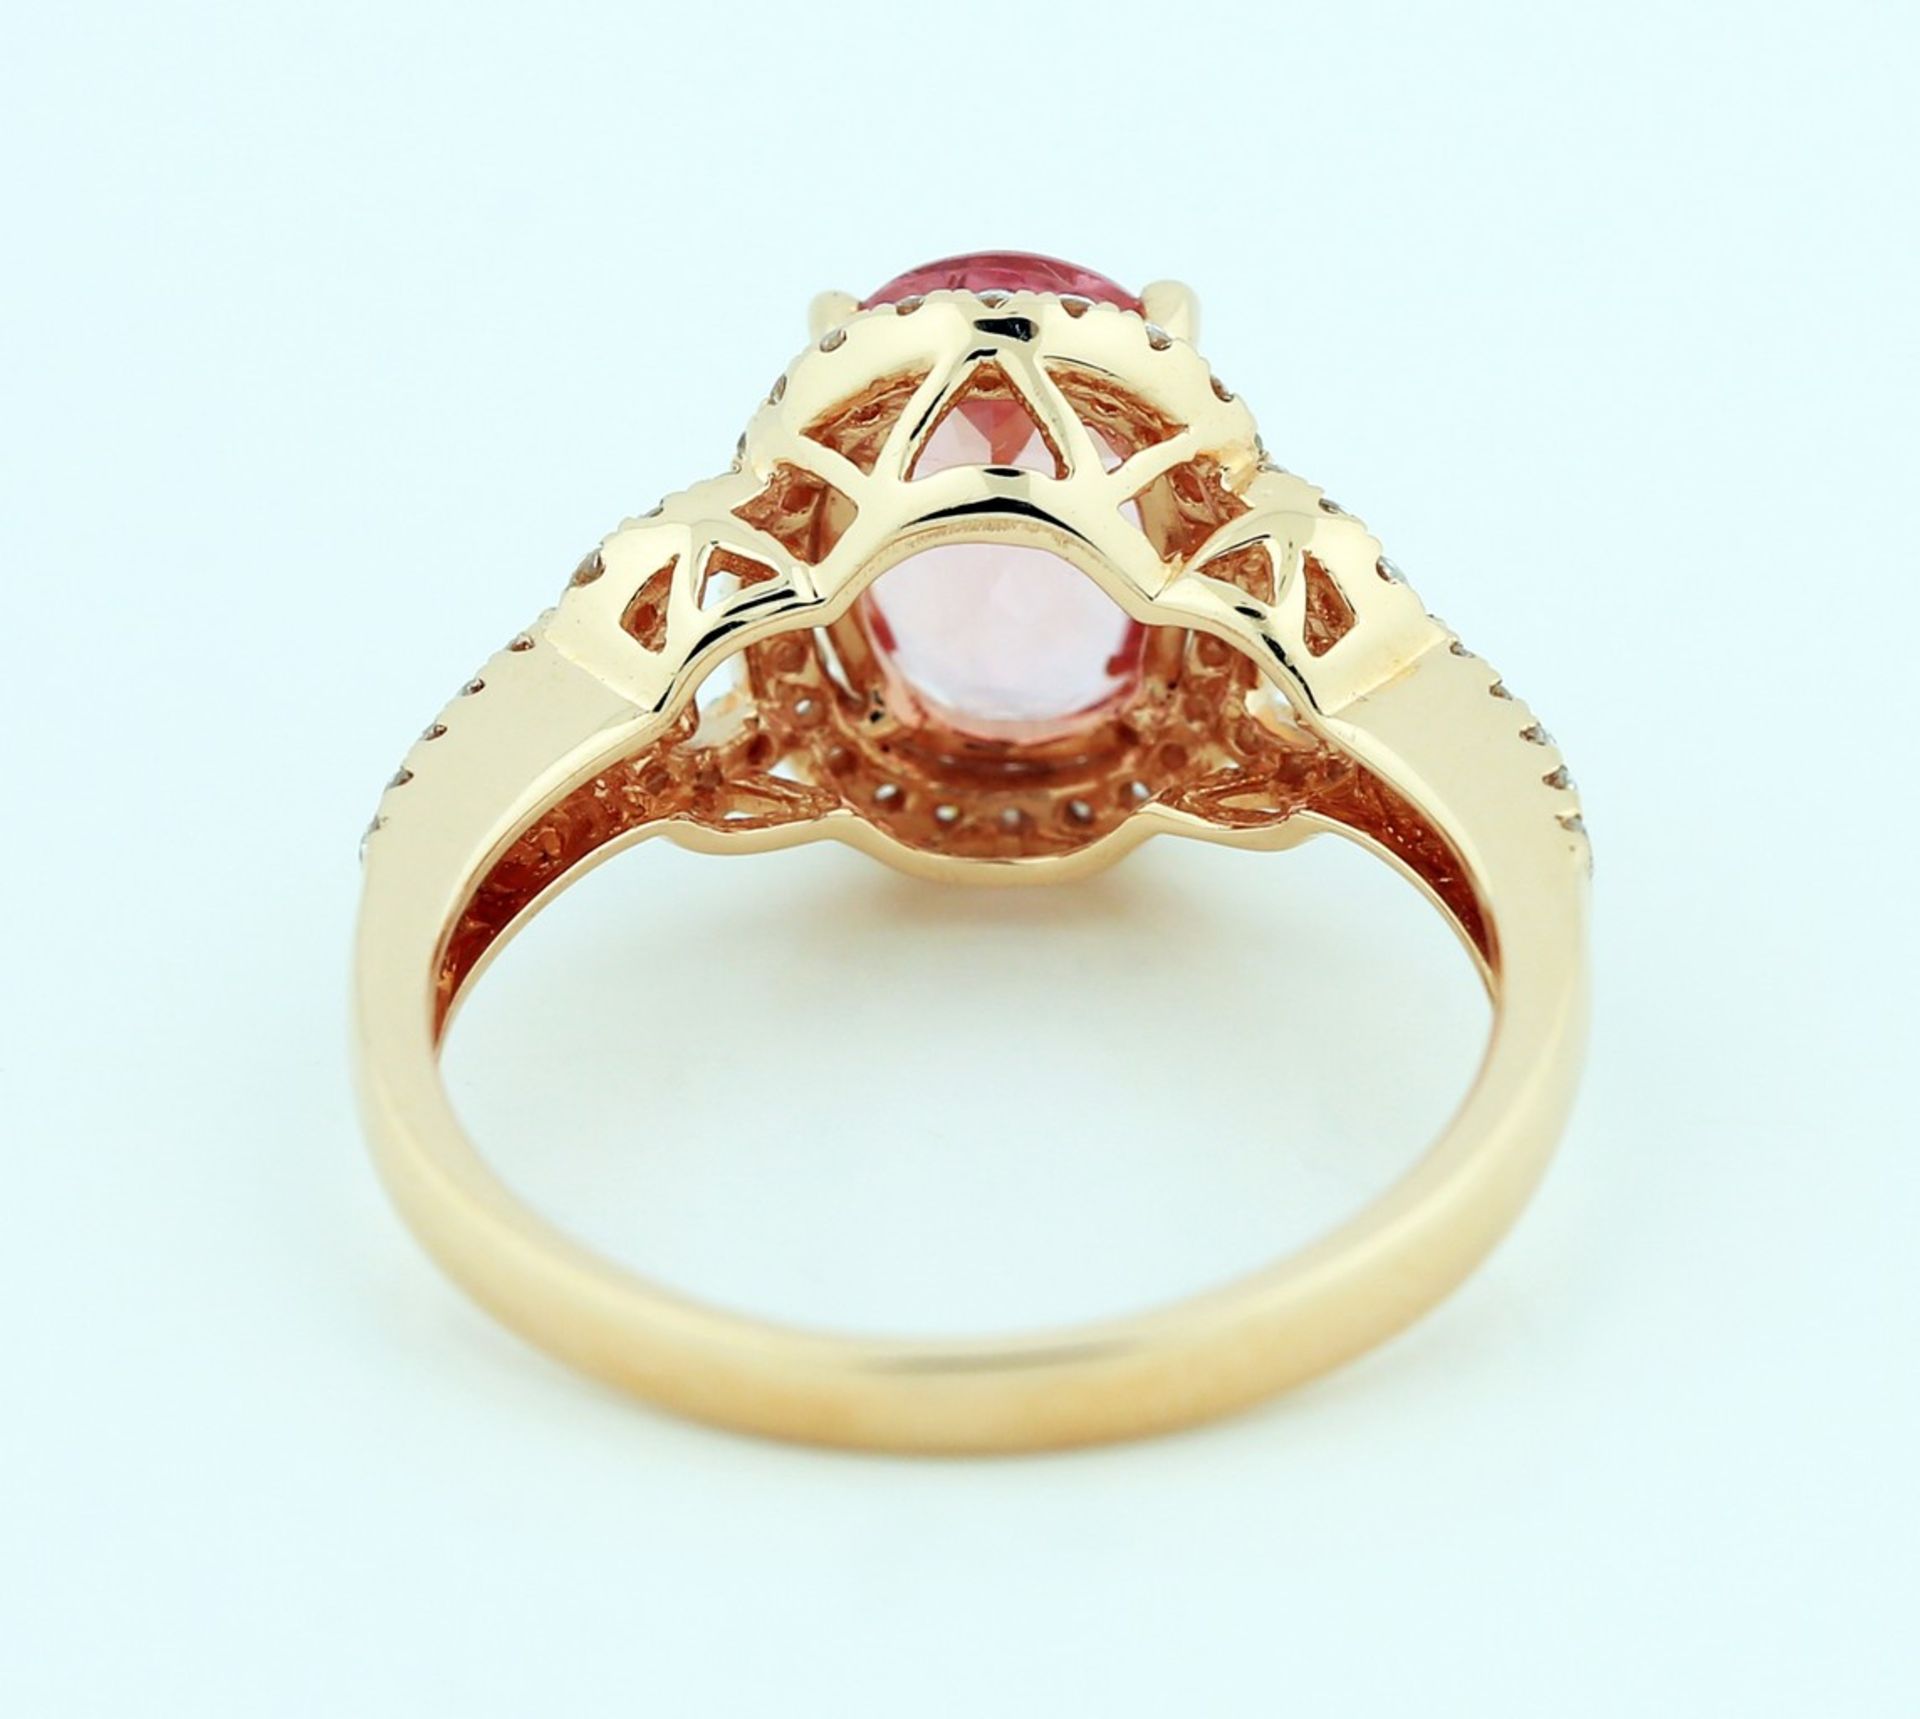 SPINEL AND DIAMOND RING Spinel and Diamond Ring Centering an oval-cut pink spinel weighing - Image 3 of 4